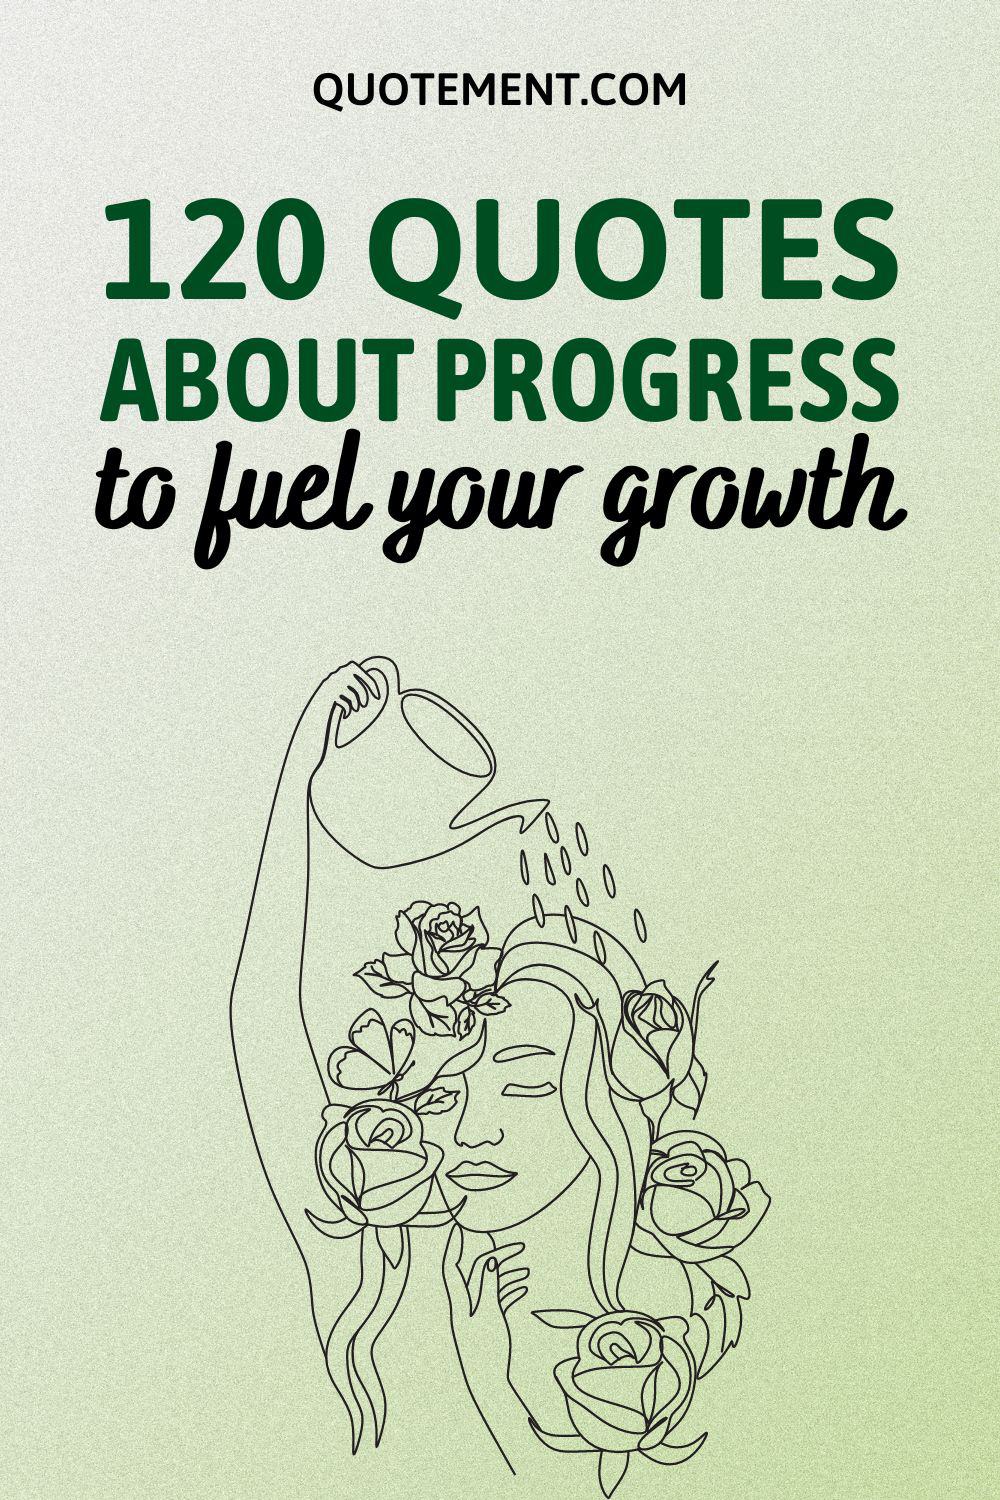 120 Ultimate Best Quotes About Progress To Fuel Your Growth
